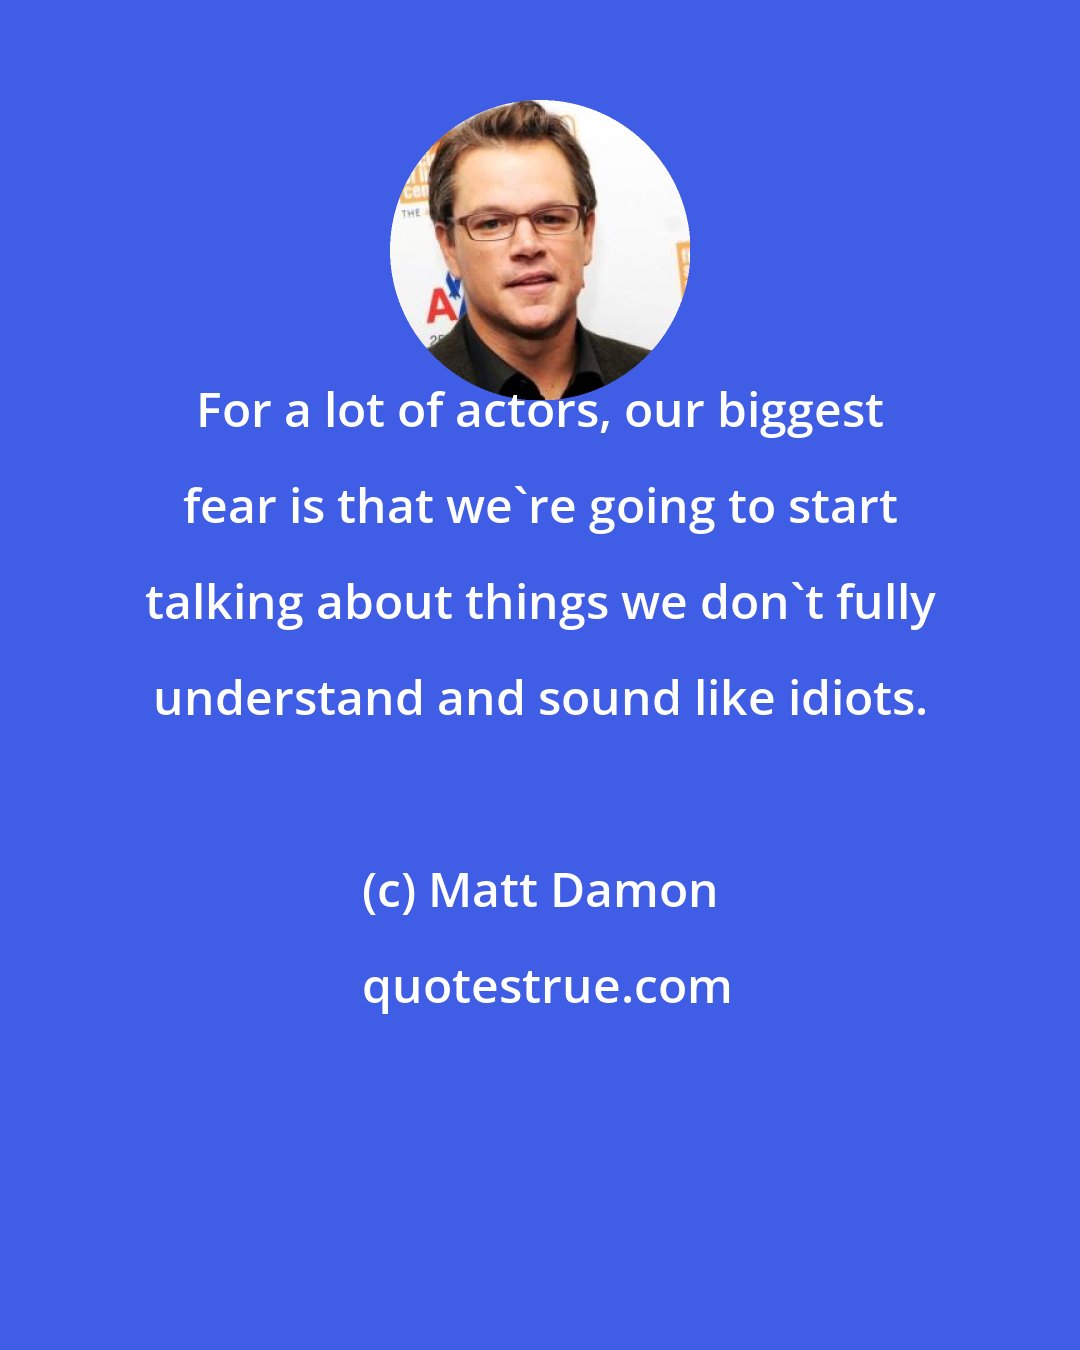 Matt Damon: For a lot of actors, our biggest fear is that we're going to start talking about things we don't fully understand and sound like idiots.